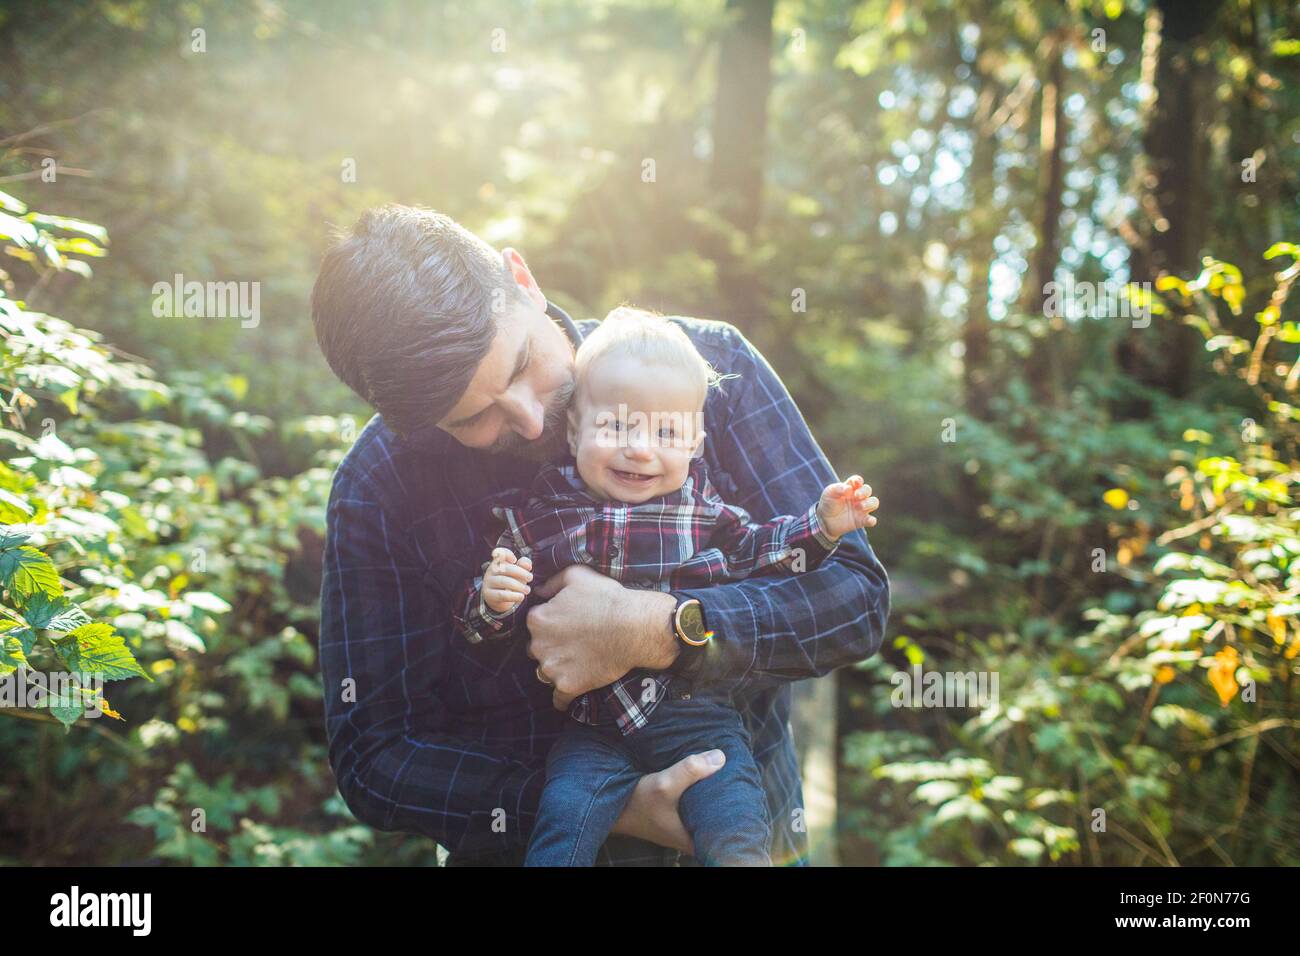 Father holding, loving young son outdoors. Stock Photo